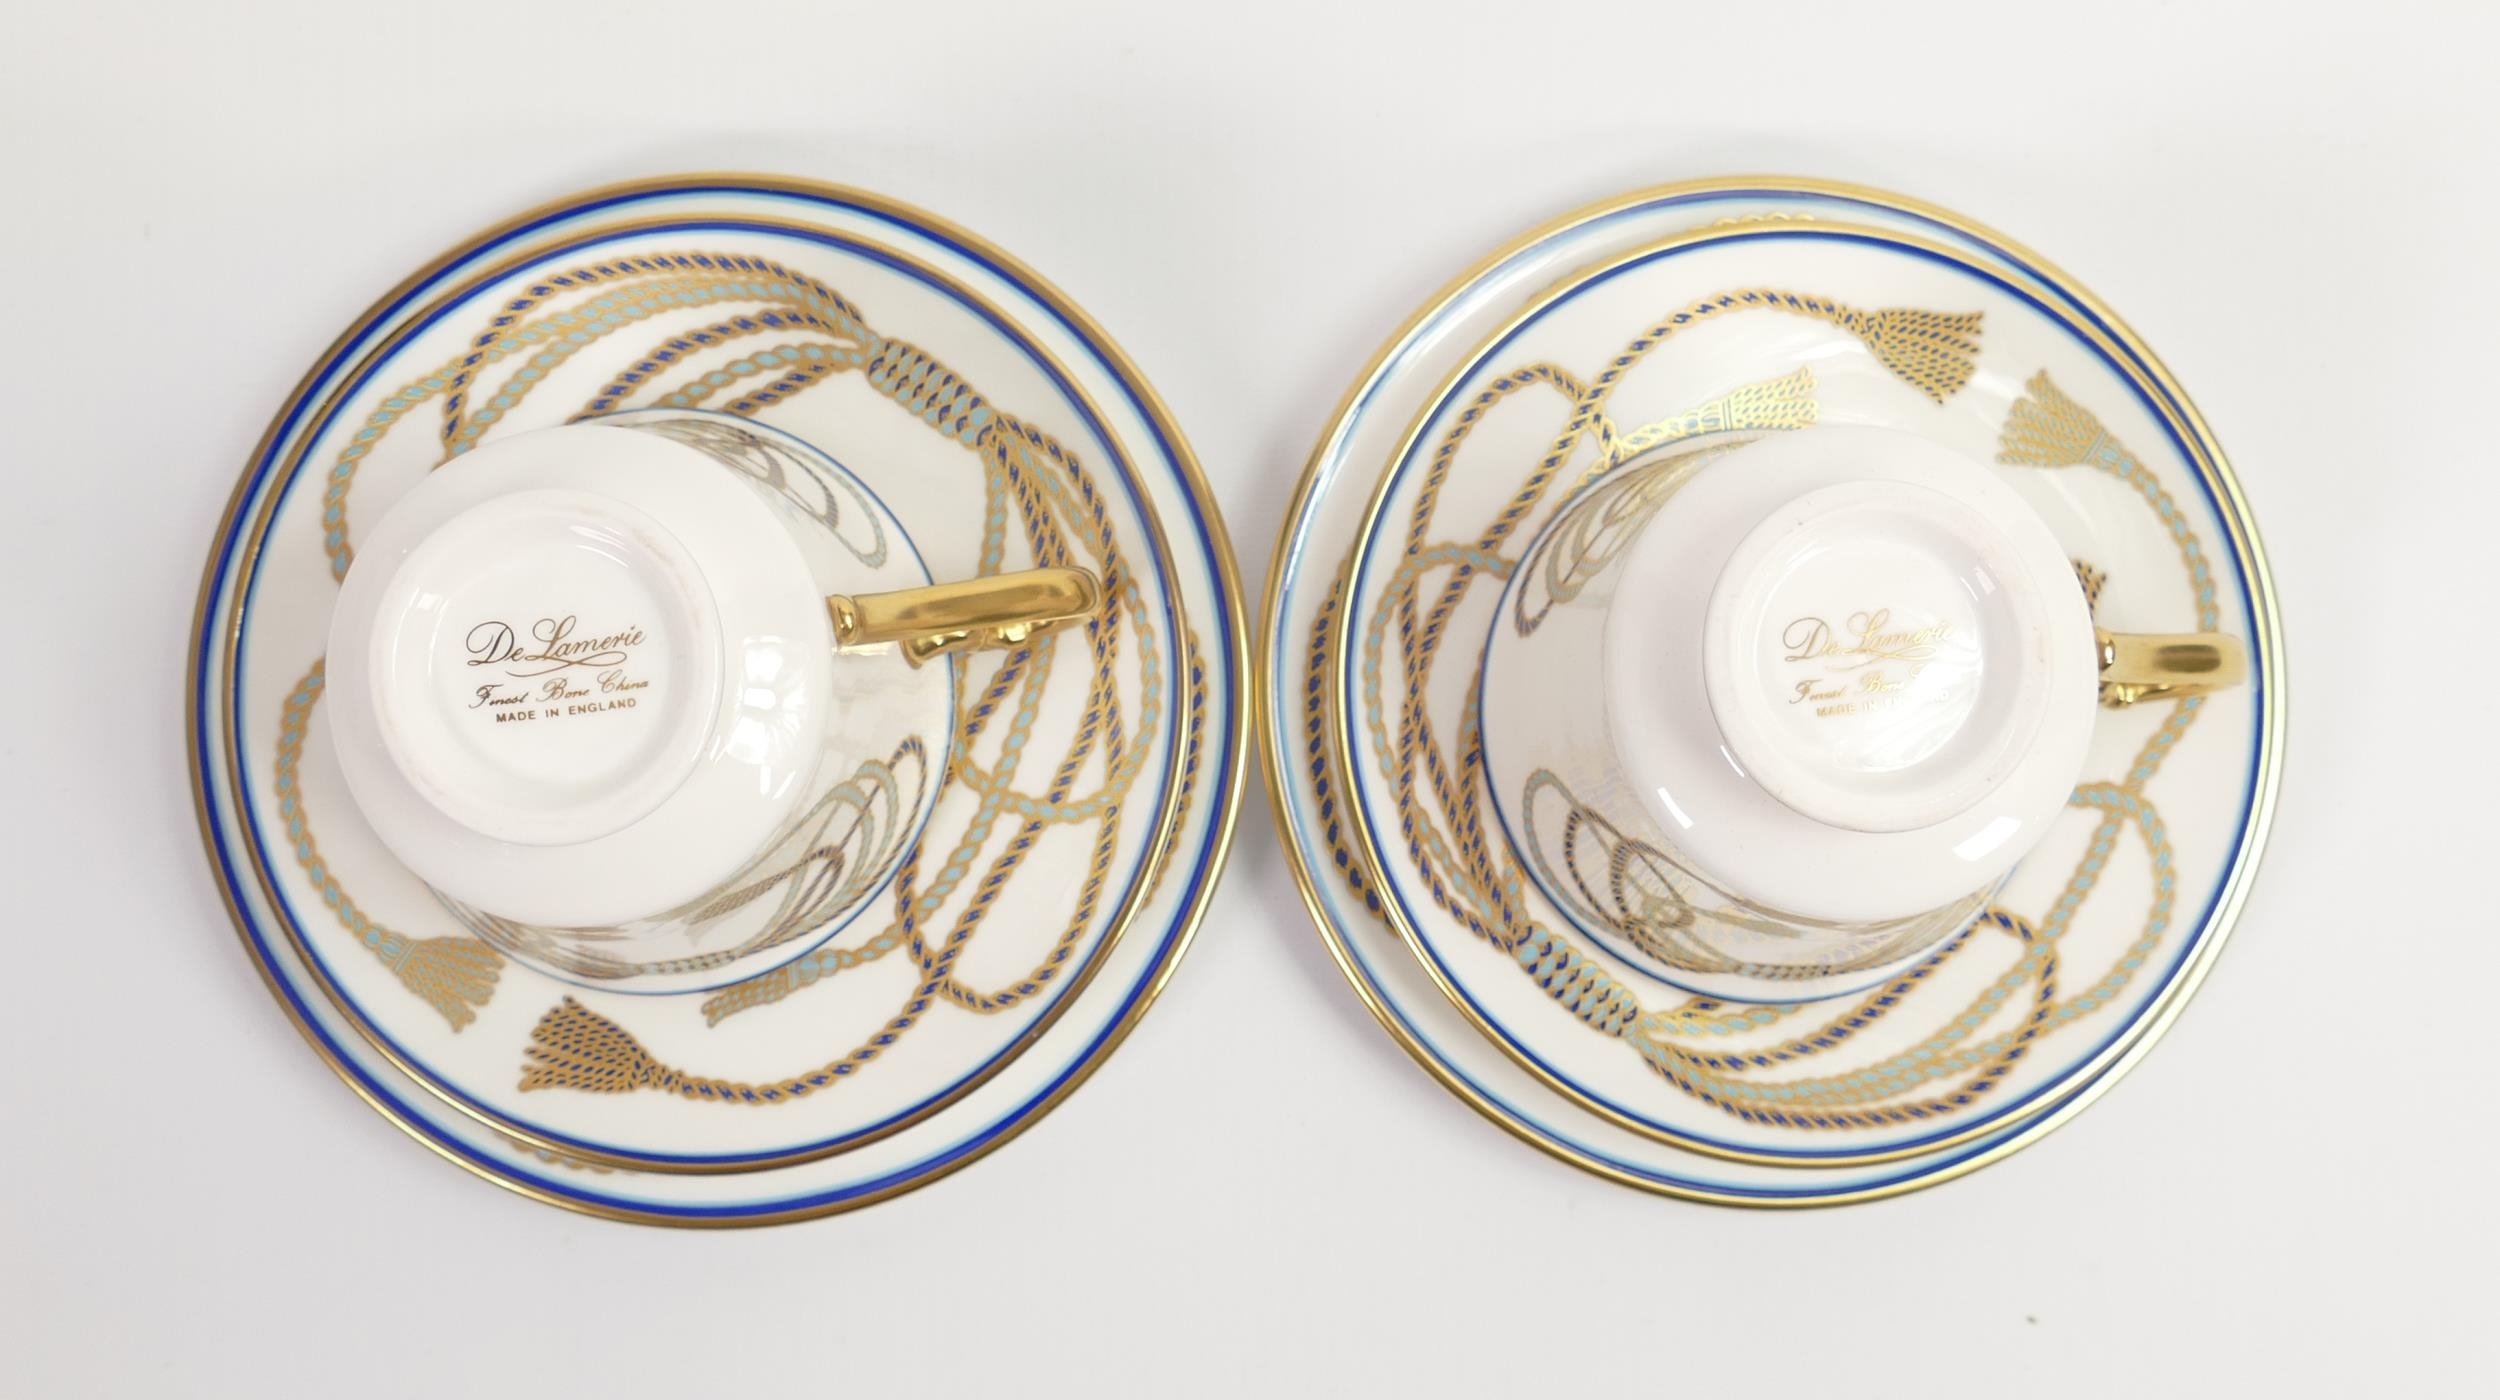 De Lamerie Fine Bone China heavily gilded Twisted Braid patterned Trio's, specially made high end - Image 3 of 3